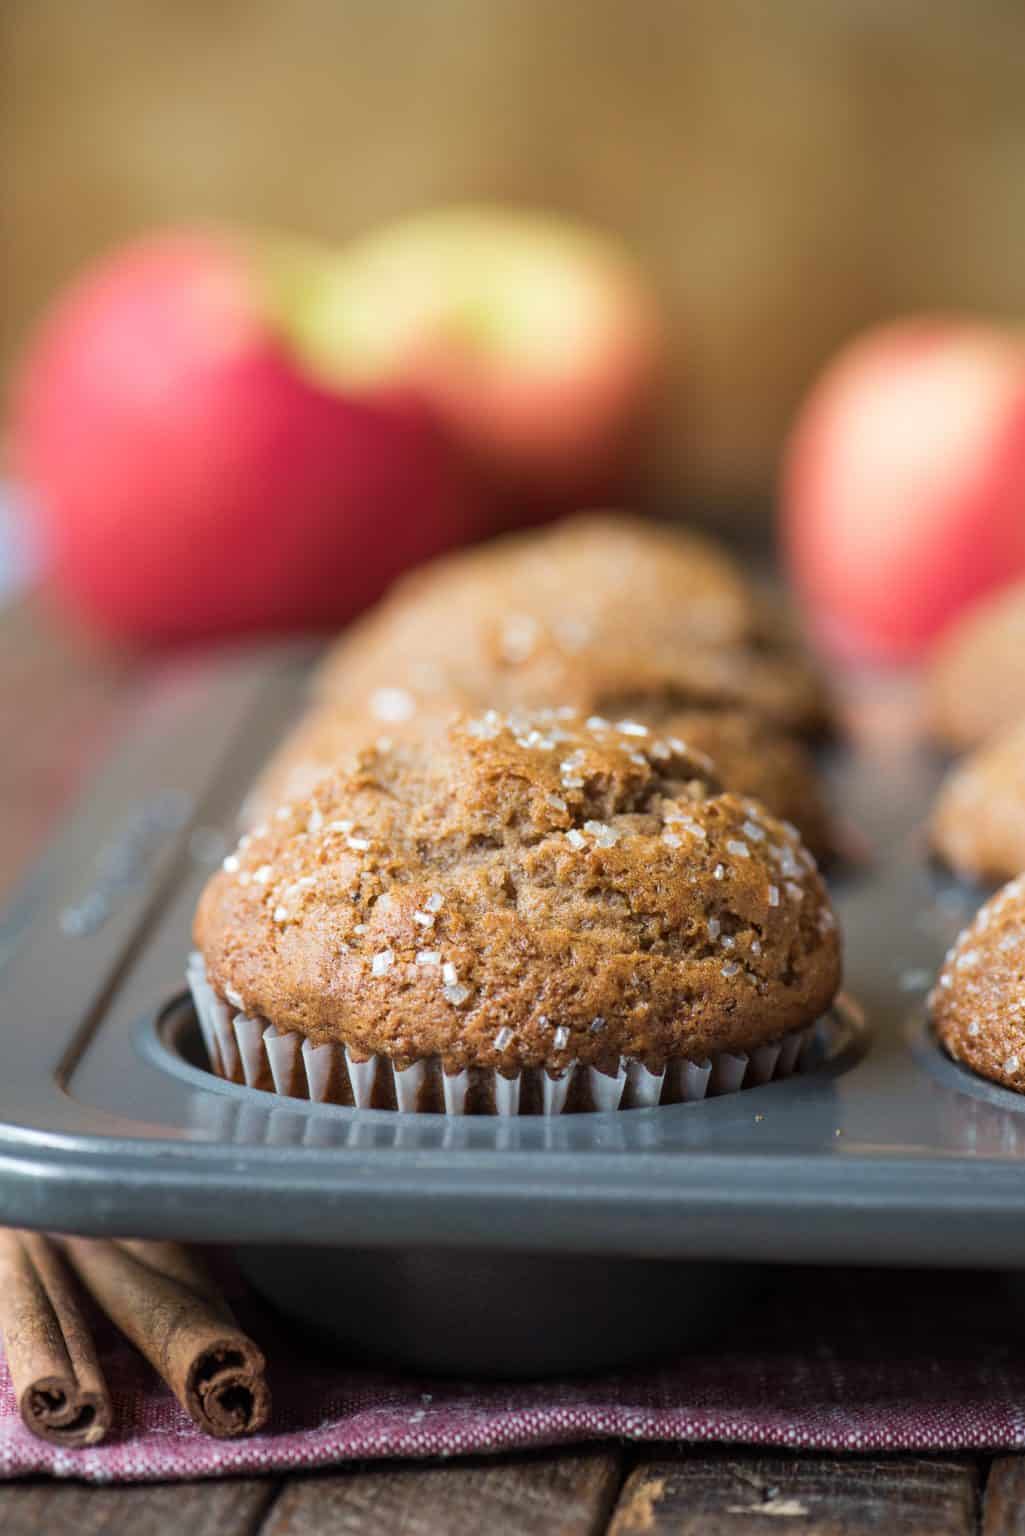 Applesauce Muffins - 10 ingredients and domed muffin tops!